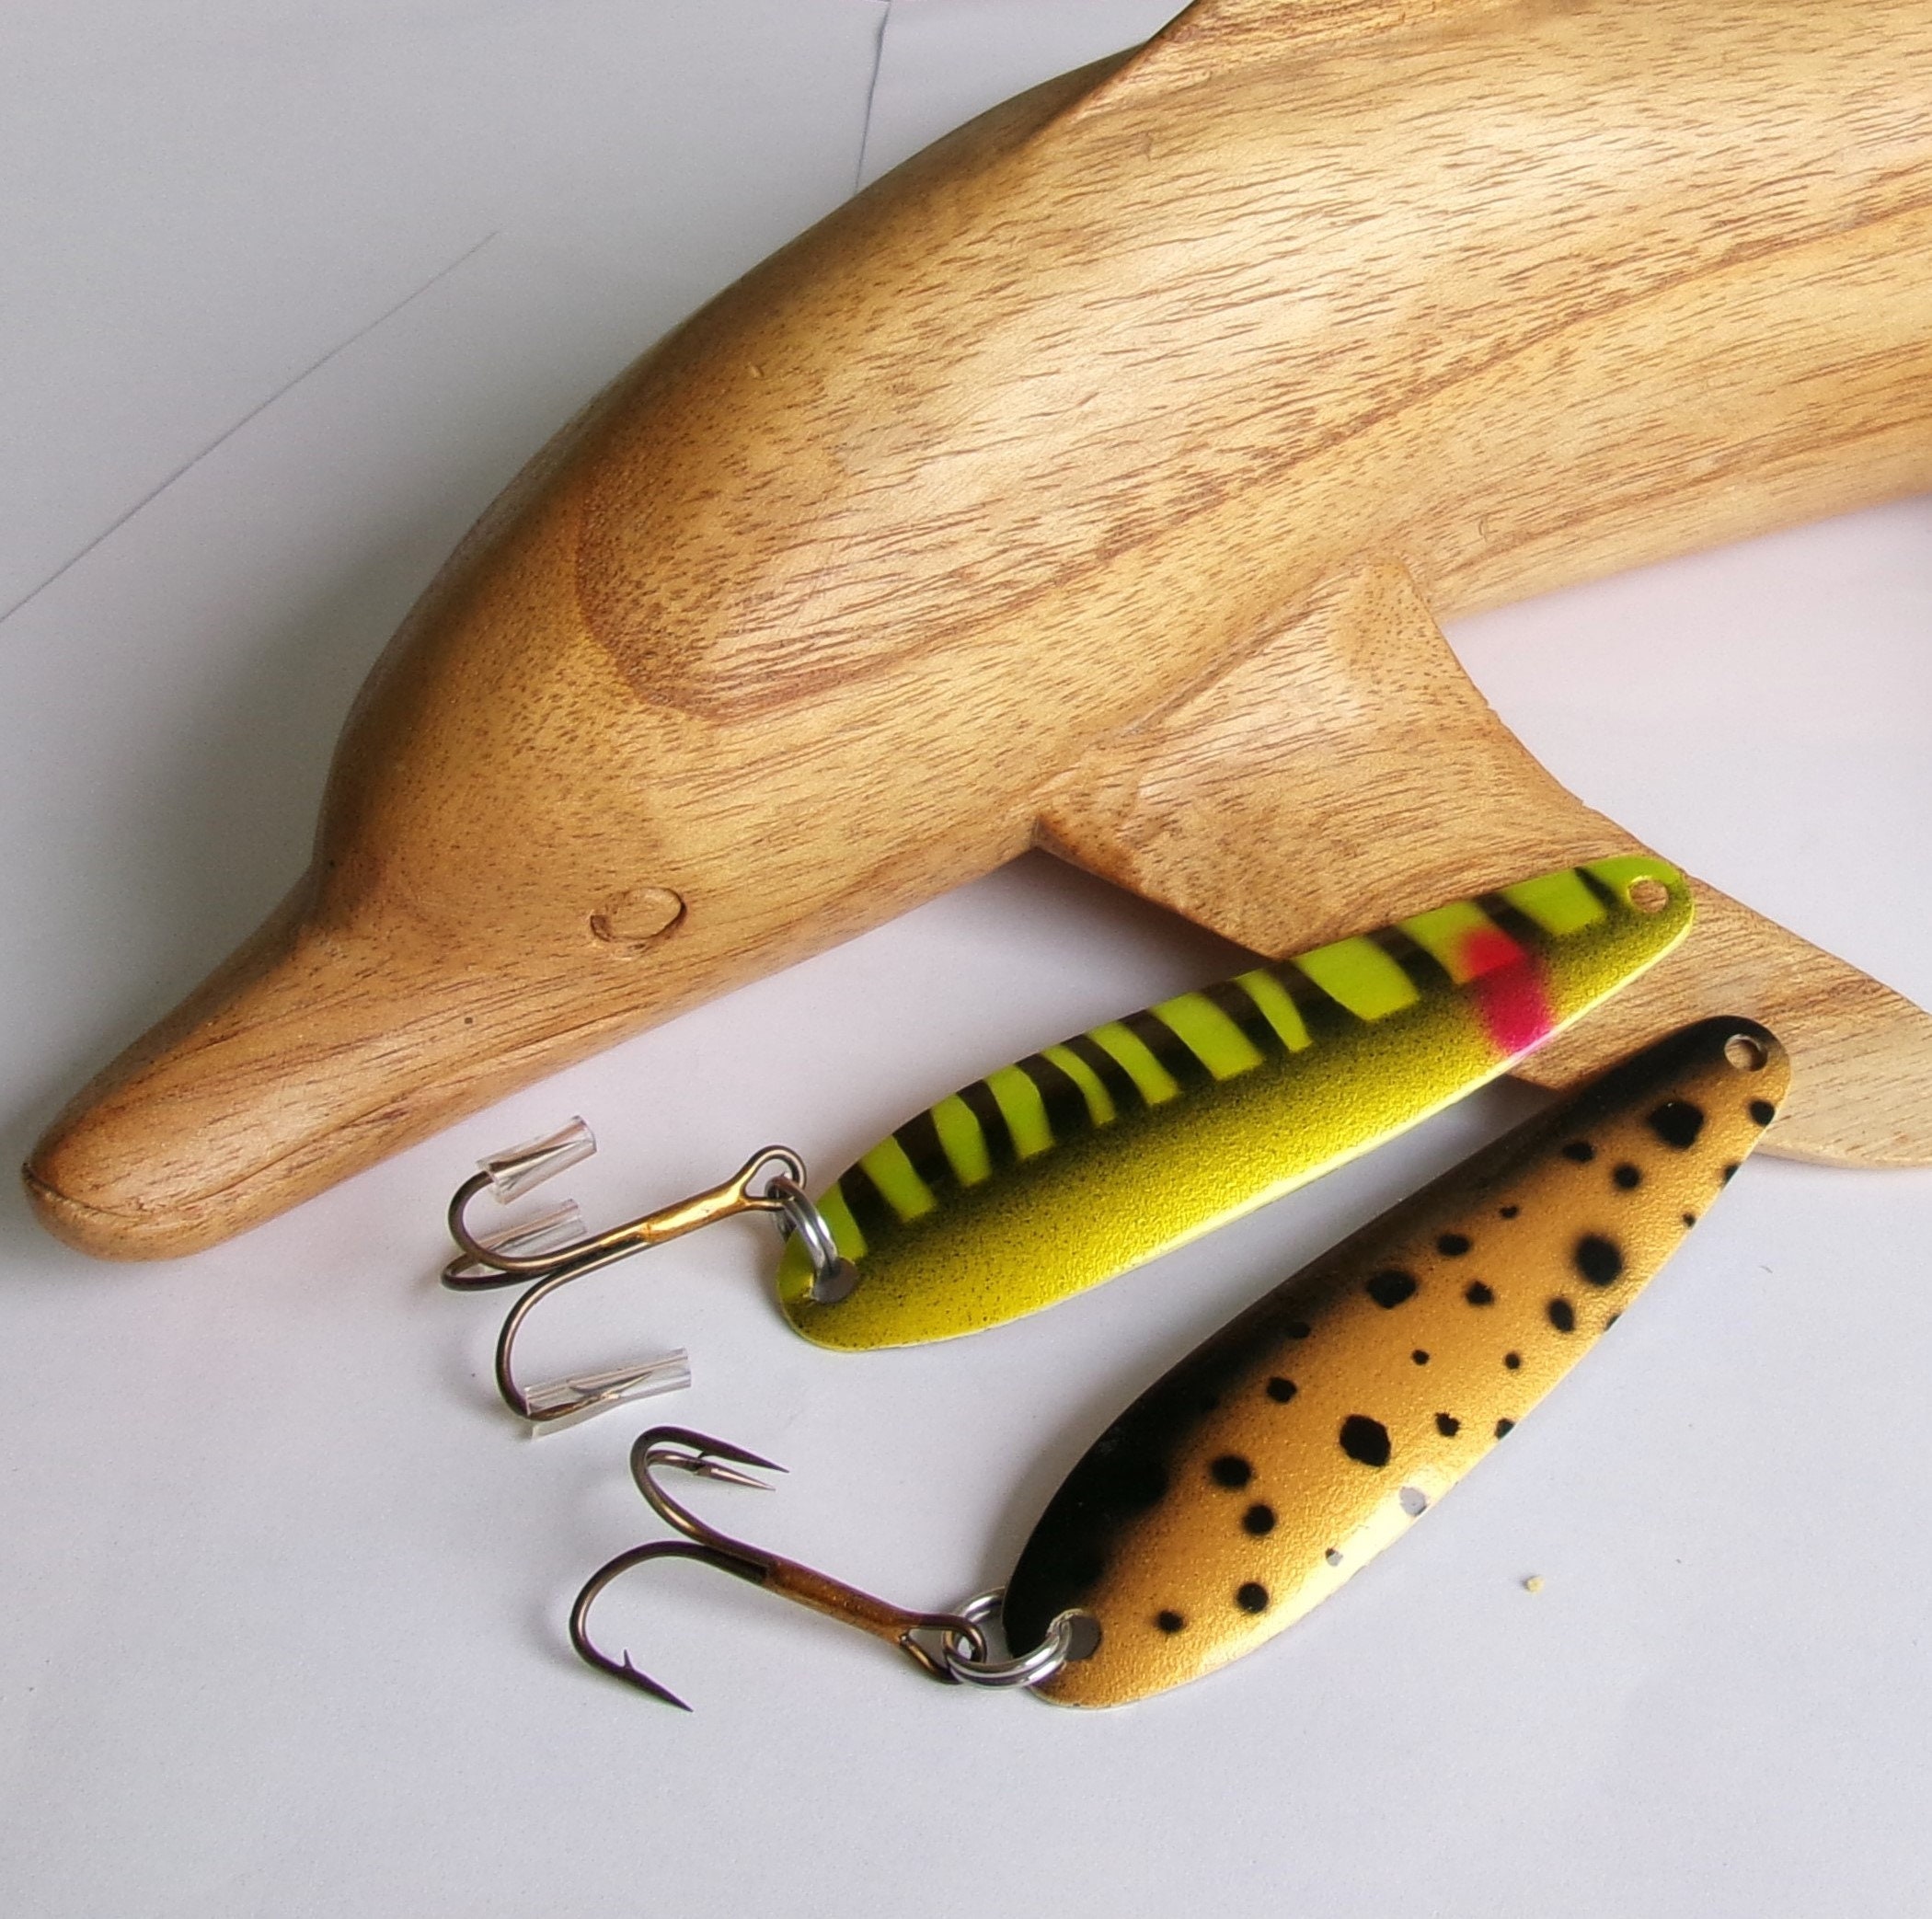 Spoon Lures Baits 